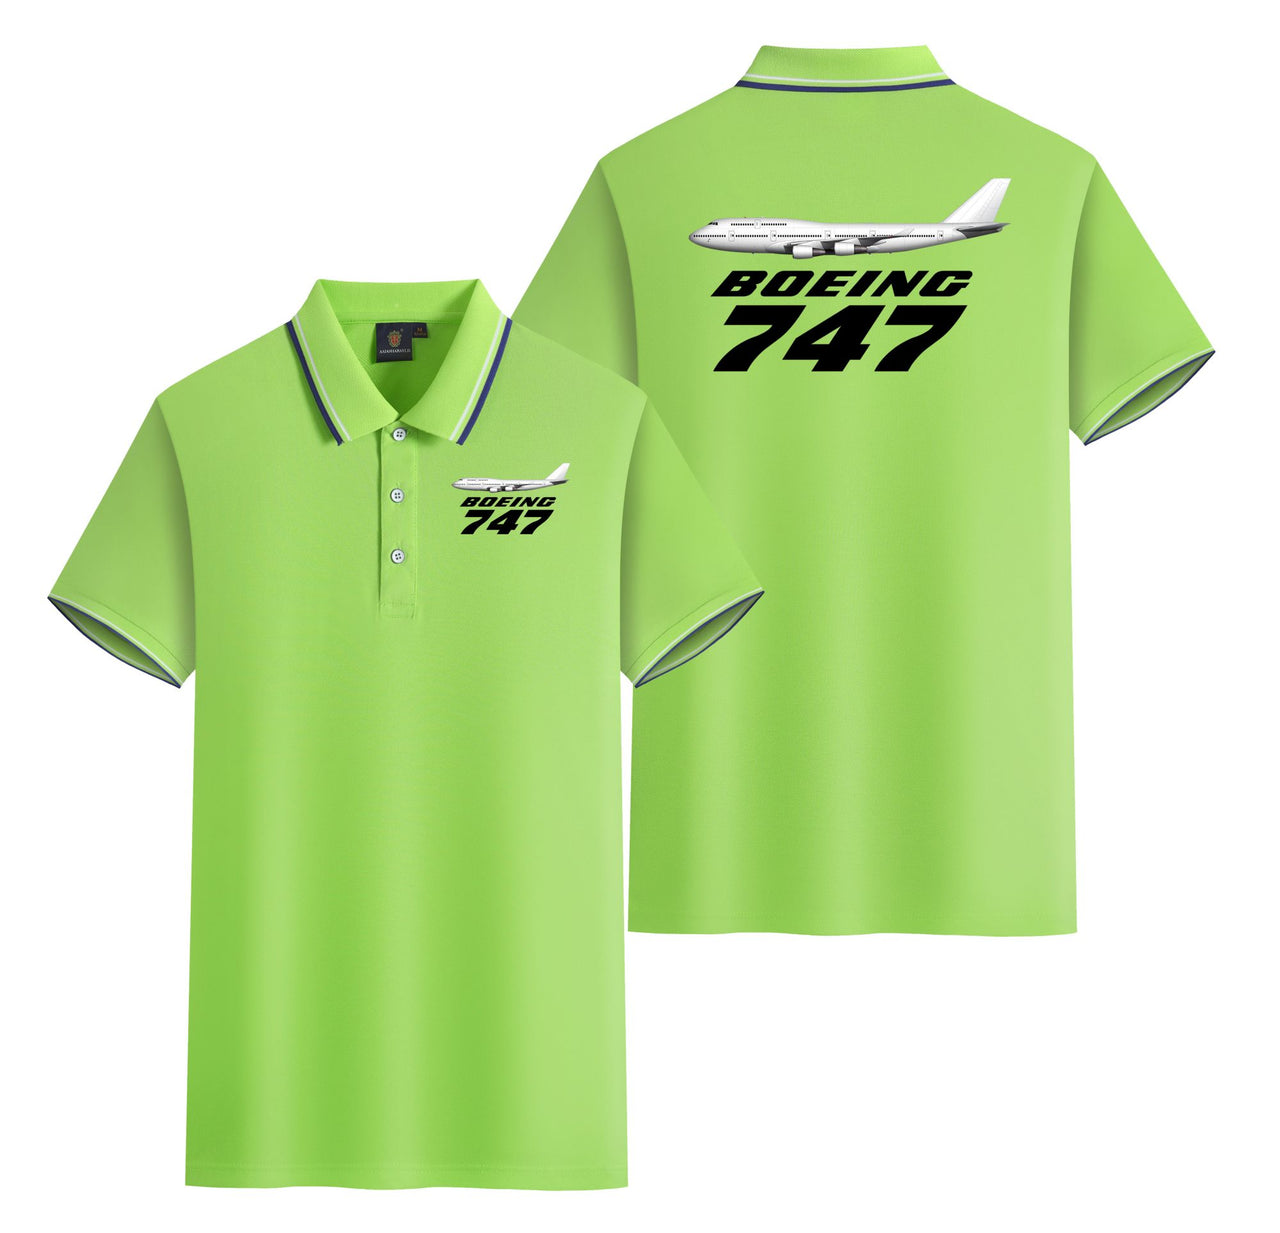 The Boeing 747 Designed Stylish Polo T-Shirts (Double-Side)